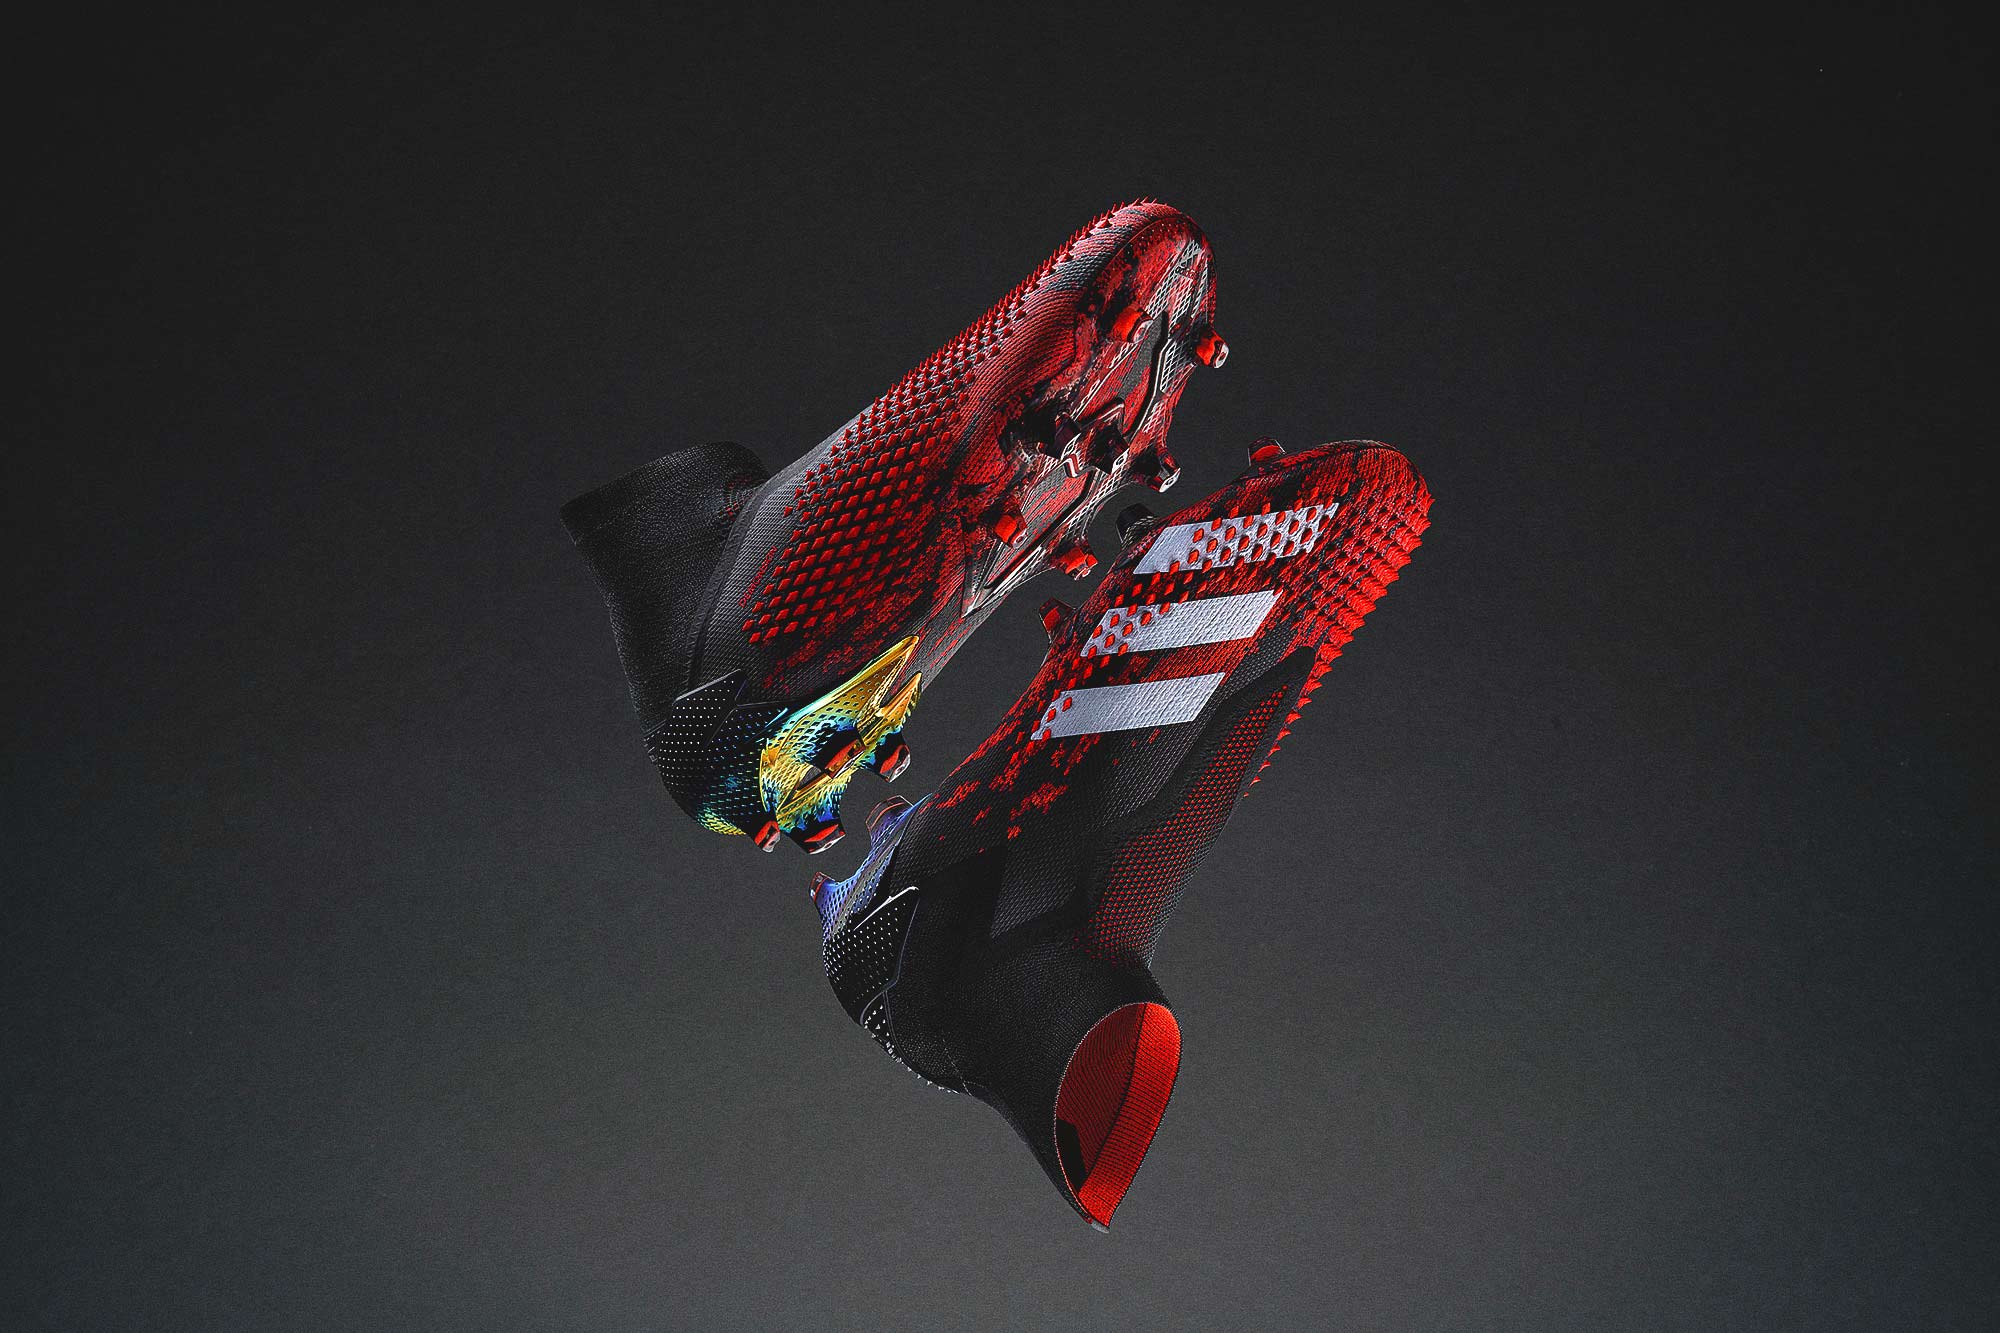 Close-up view of the latest Adidas Predator 2.0 Football Boot, showcasing its sleek design and advanced features, captured in a commercial product photography shoot for Adidas.